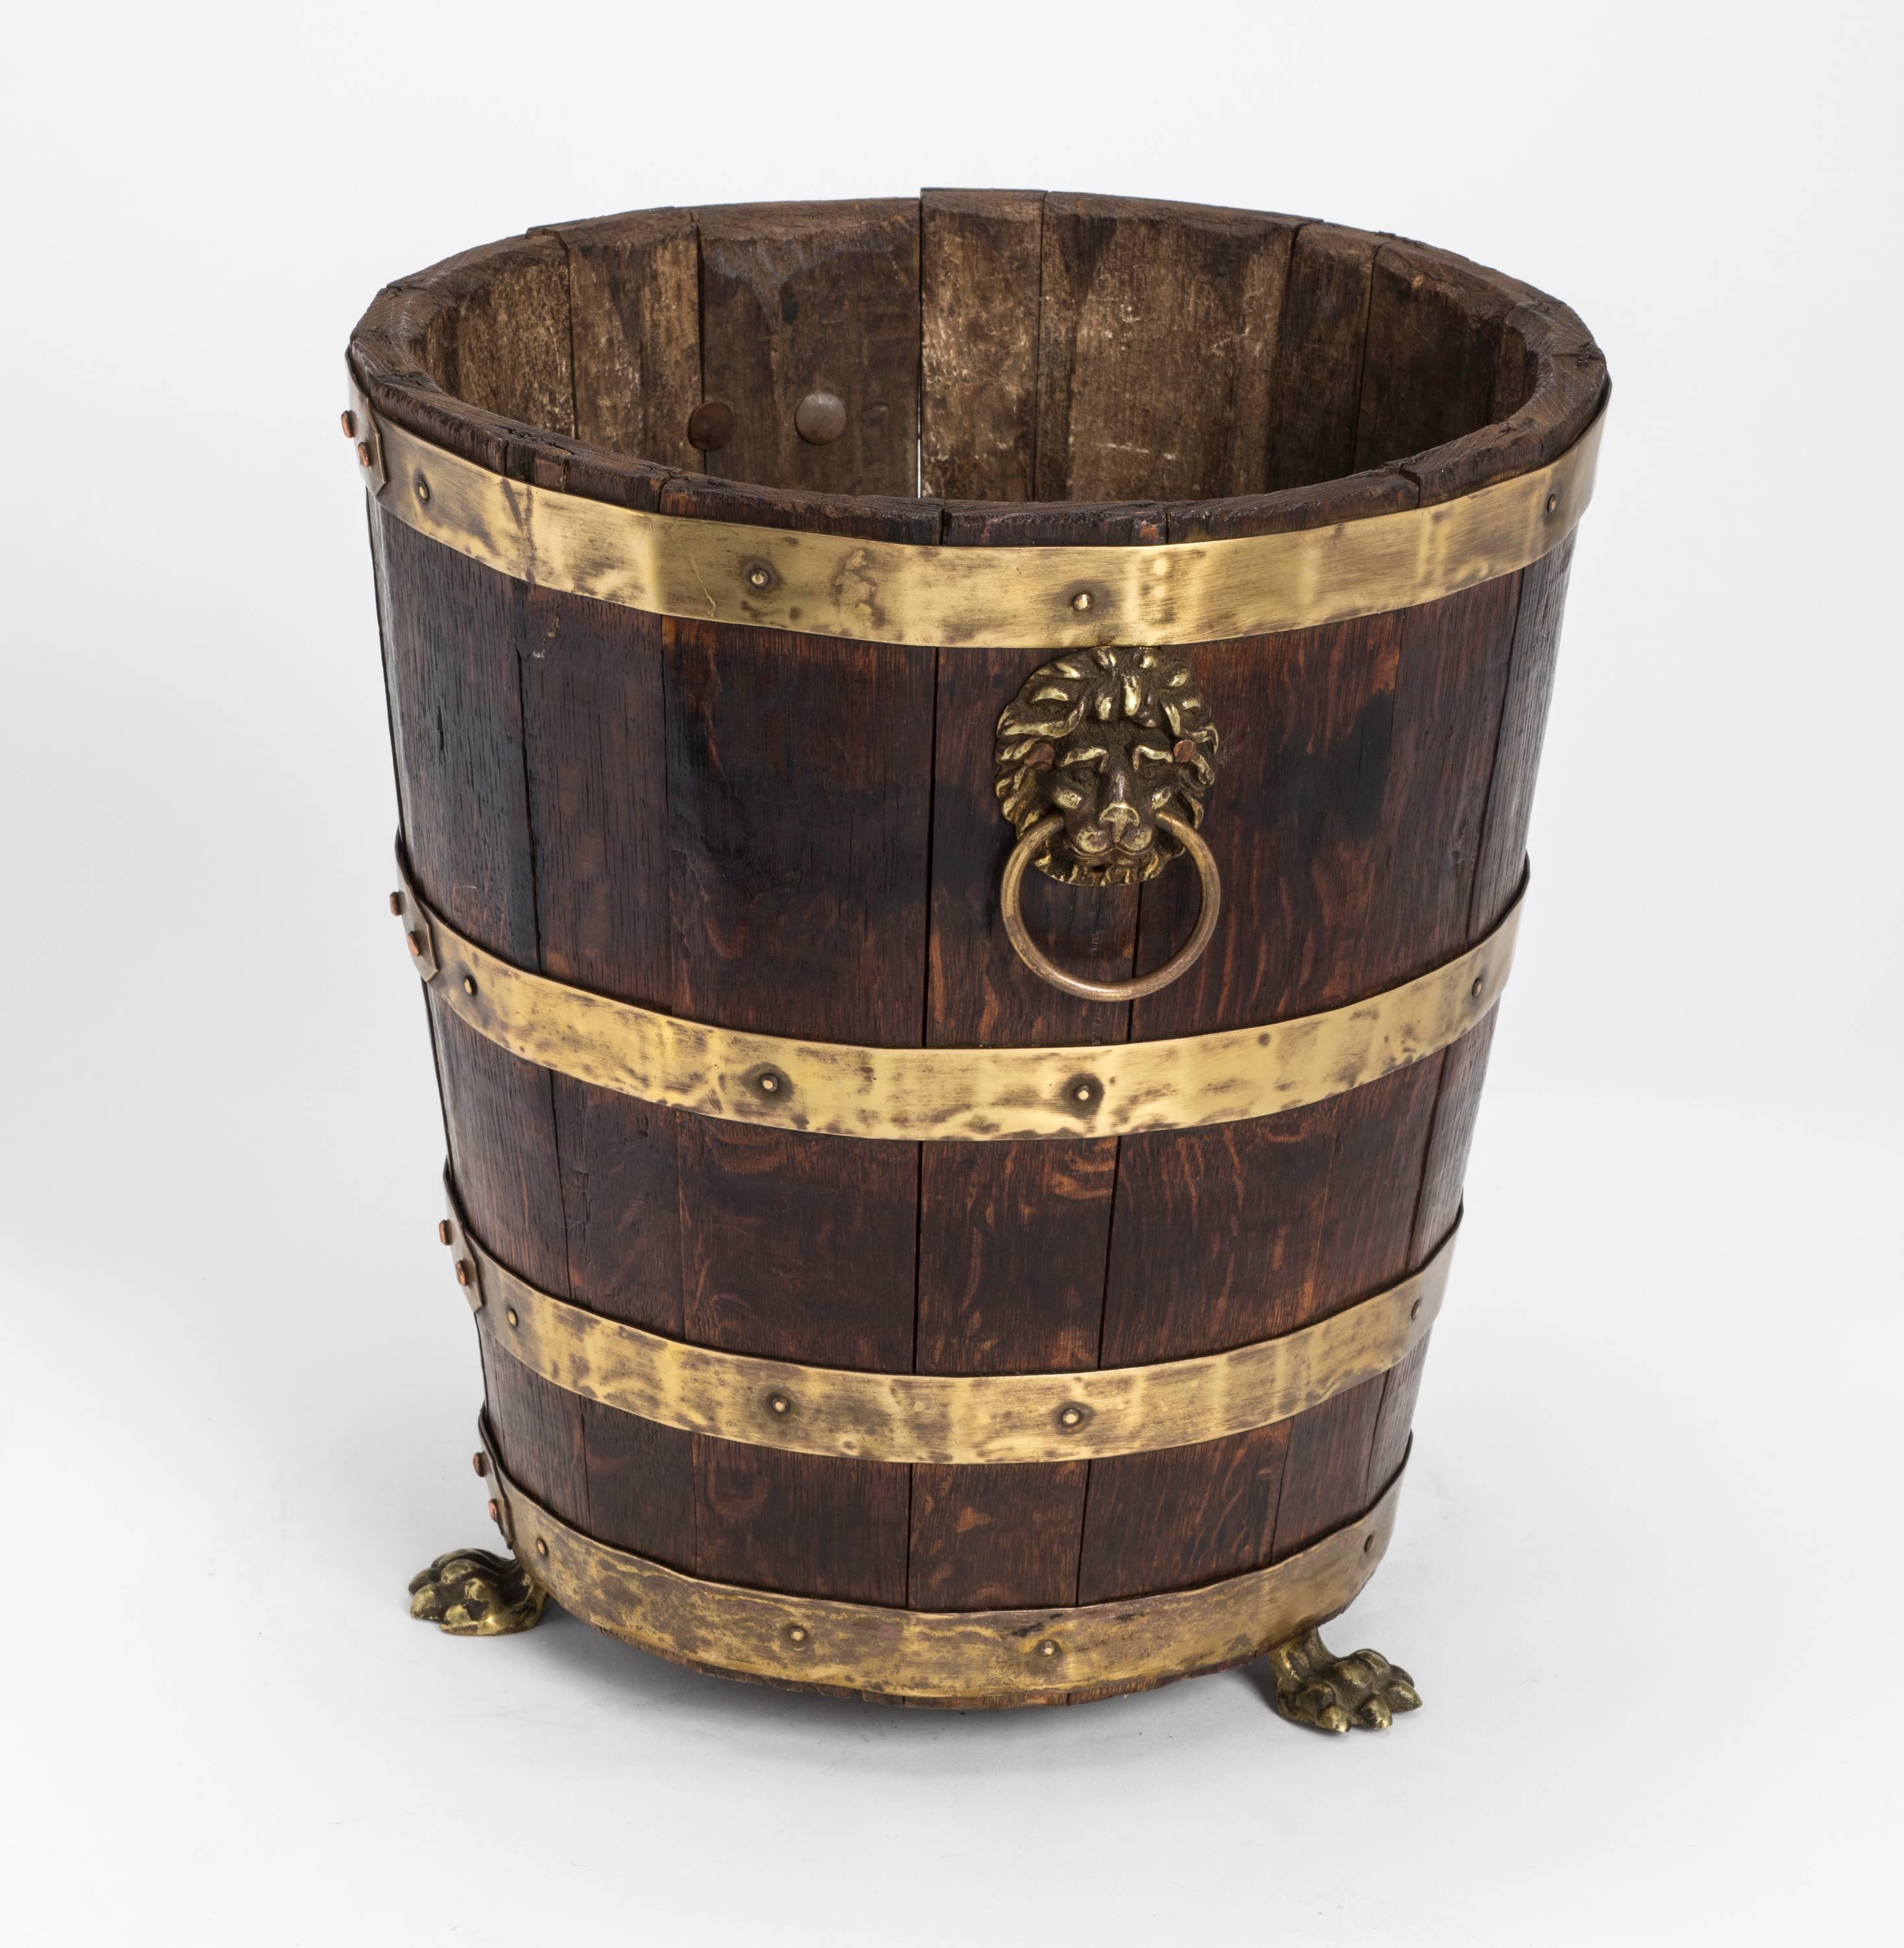 Charming wooden bucket from the George III period. Made with hard oakwood held together with brass bandings. Decorative brass lion mask handles and lion feet. A very nice old piece.